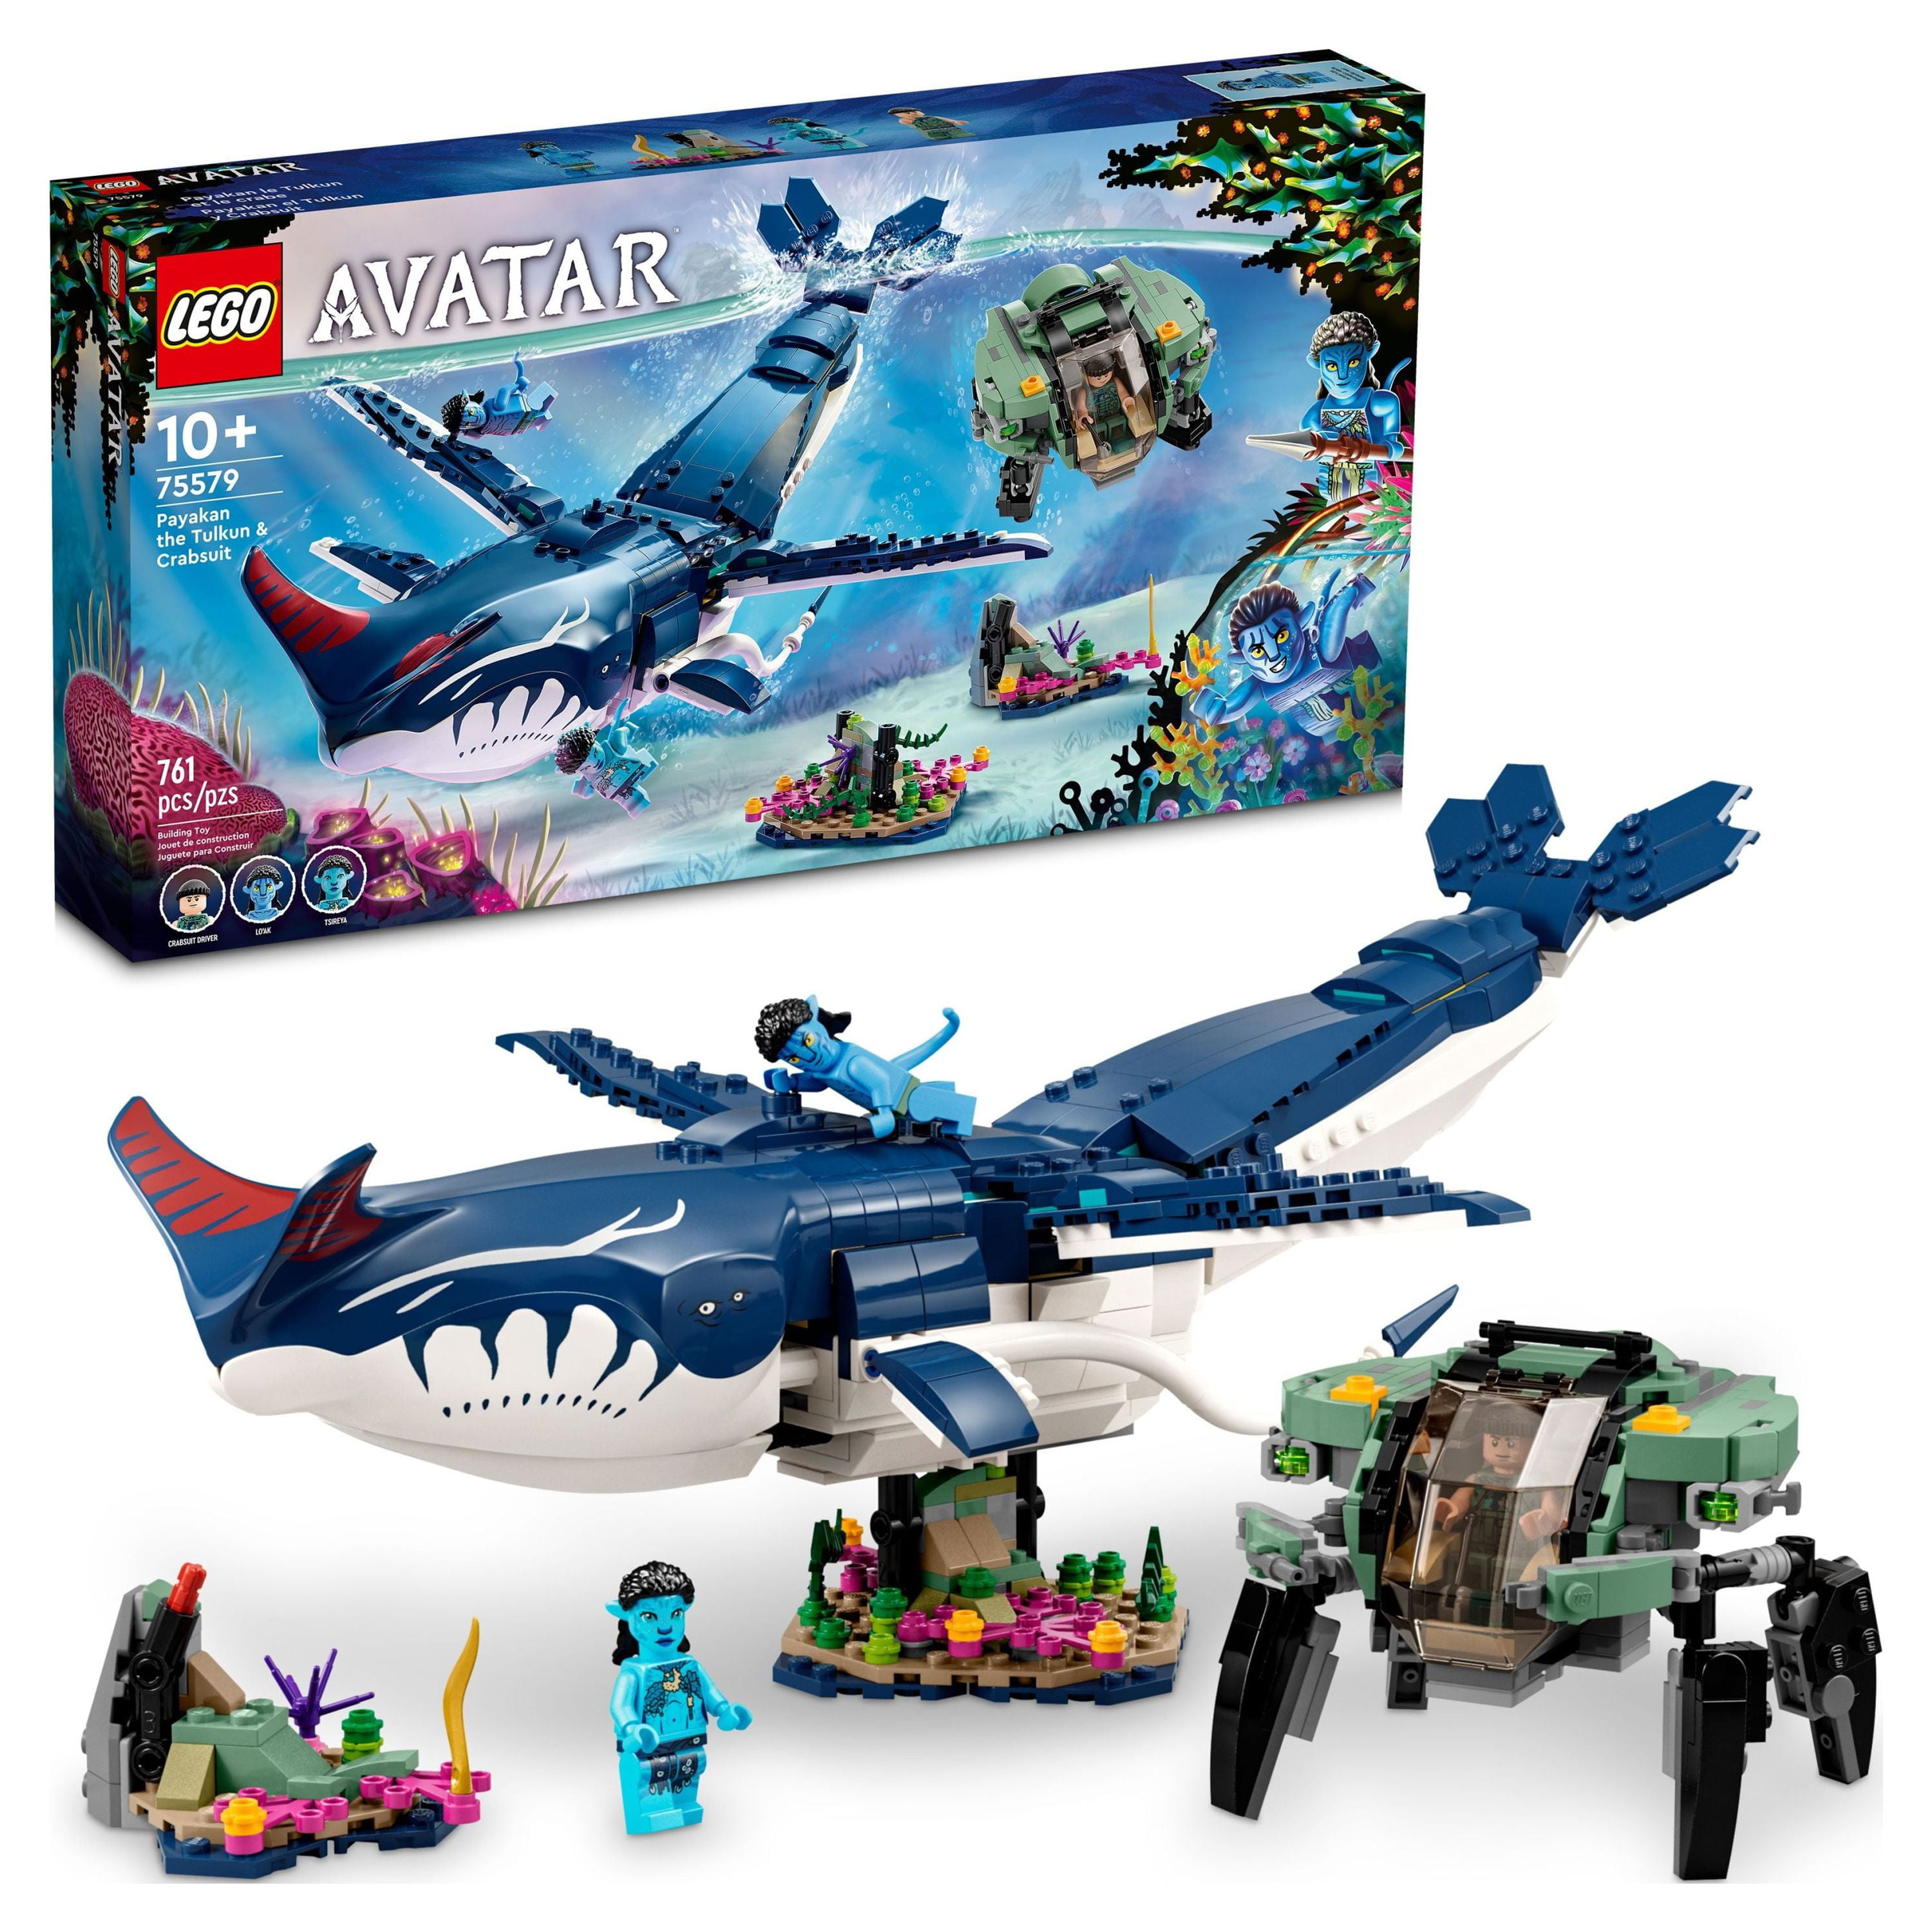 LEGO Avatar: The Way of Water Payakan the Tulkun & Crabsuit 75579, Building  Toy Set, Movie Underwater Ocean with Whale-Like Sea Animal Creature Figure